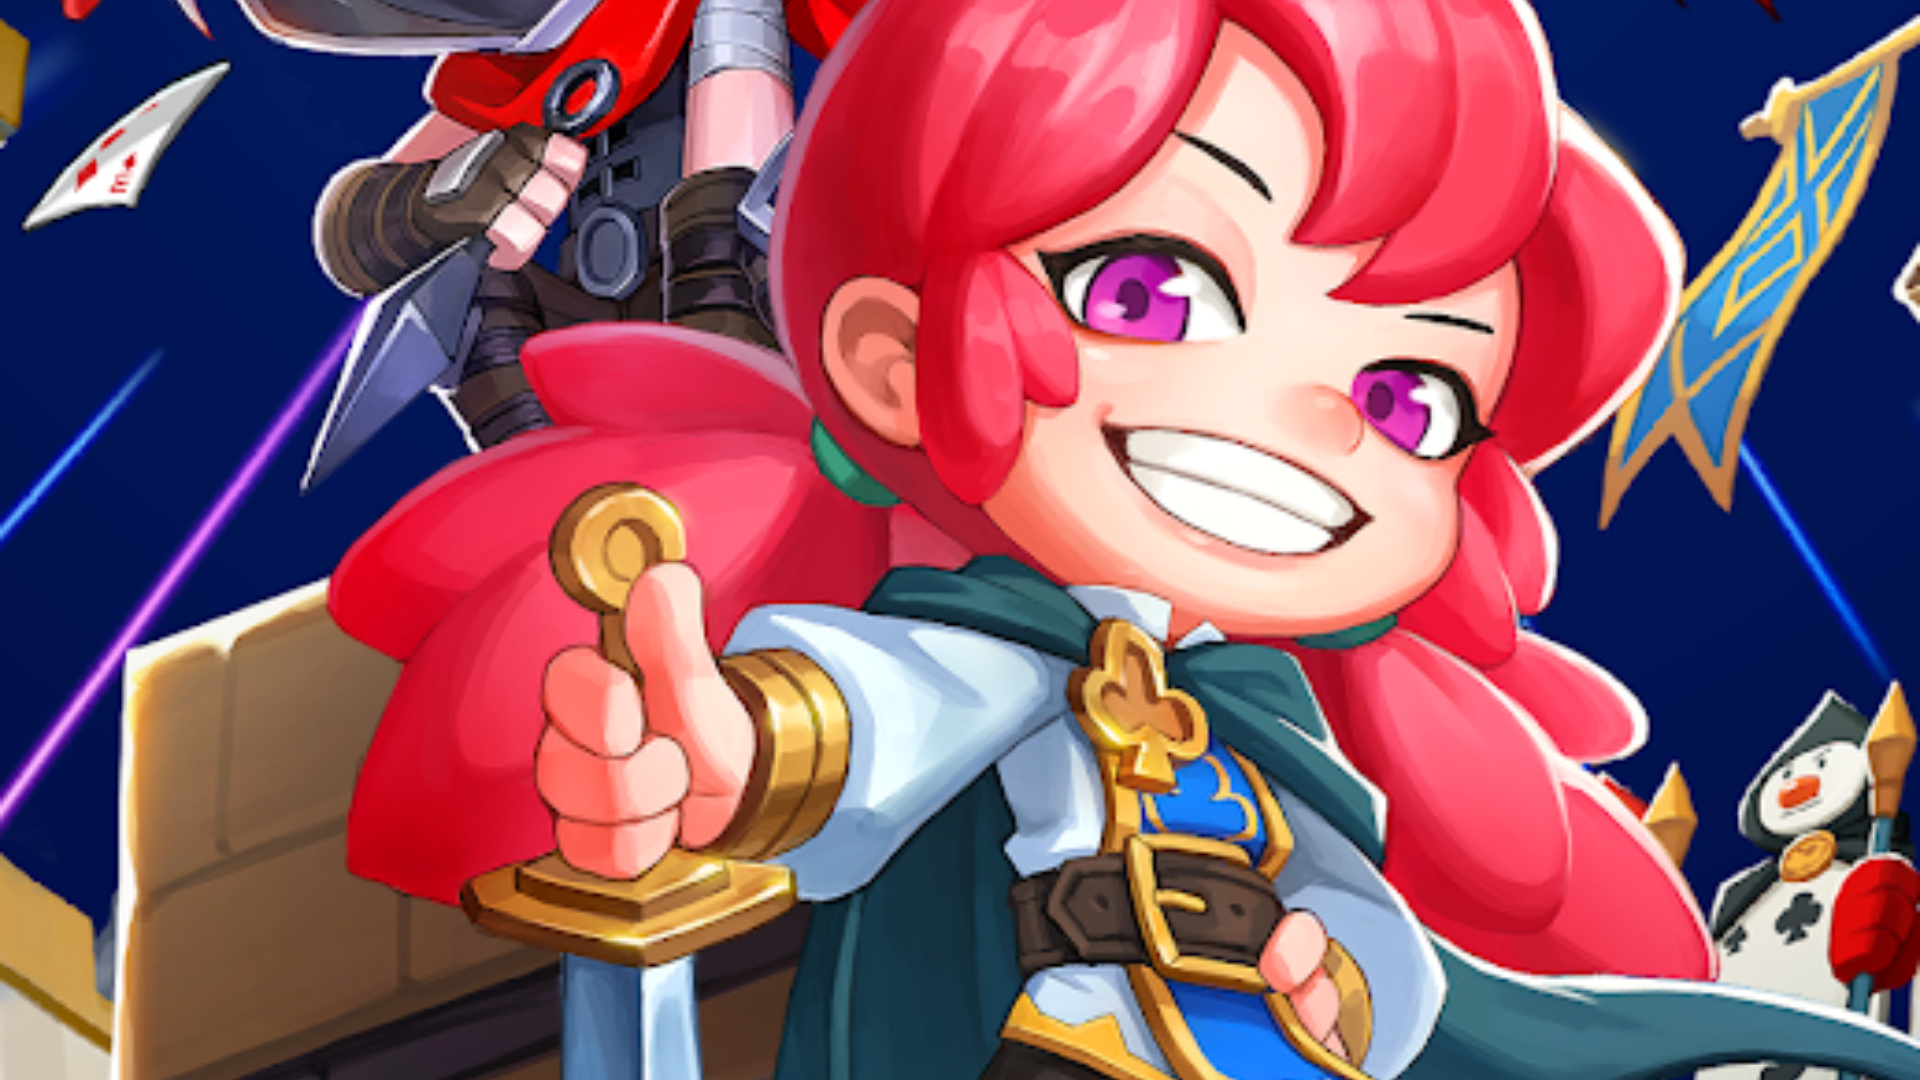 We Hope You Get A Royal Flush As Com2uS Releases Poker Tower Defense thumbnail